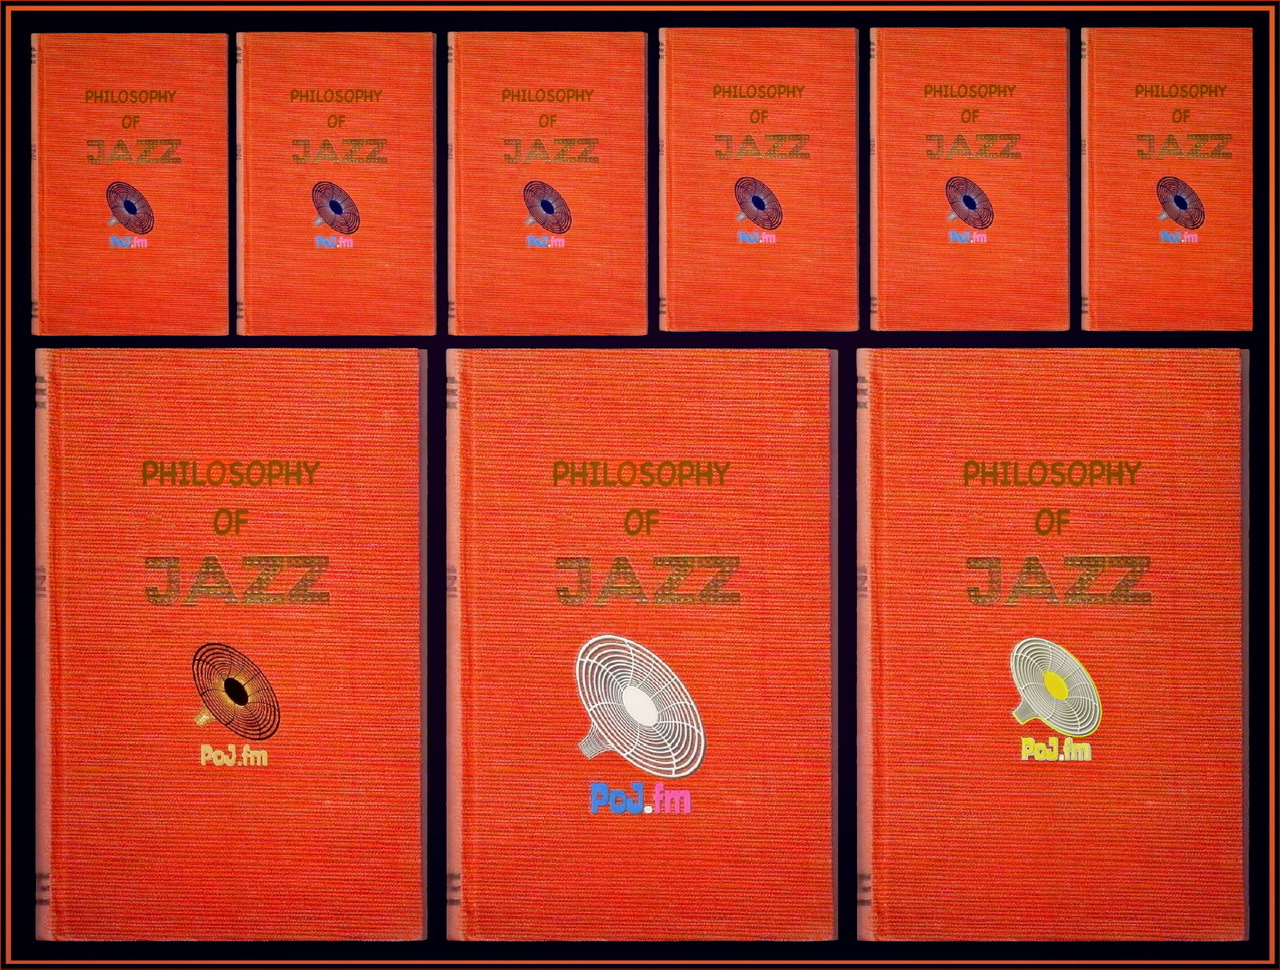 A framed set of the same orange cover book with the title "Philosophy of Jazz" printed on cover with different color PoJ.fm logos.jpeg